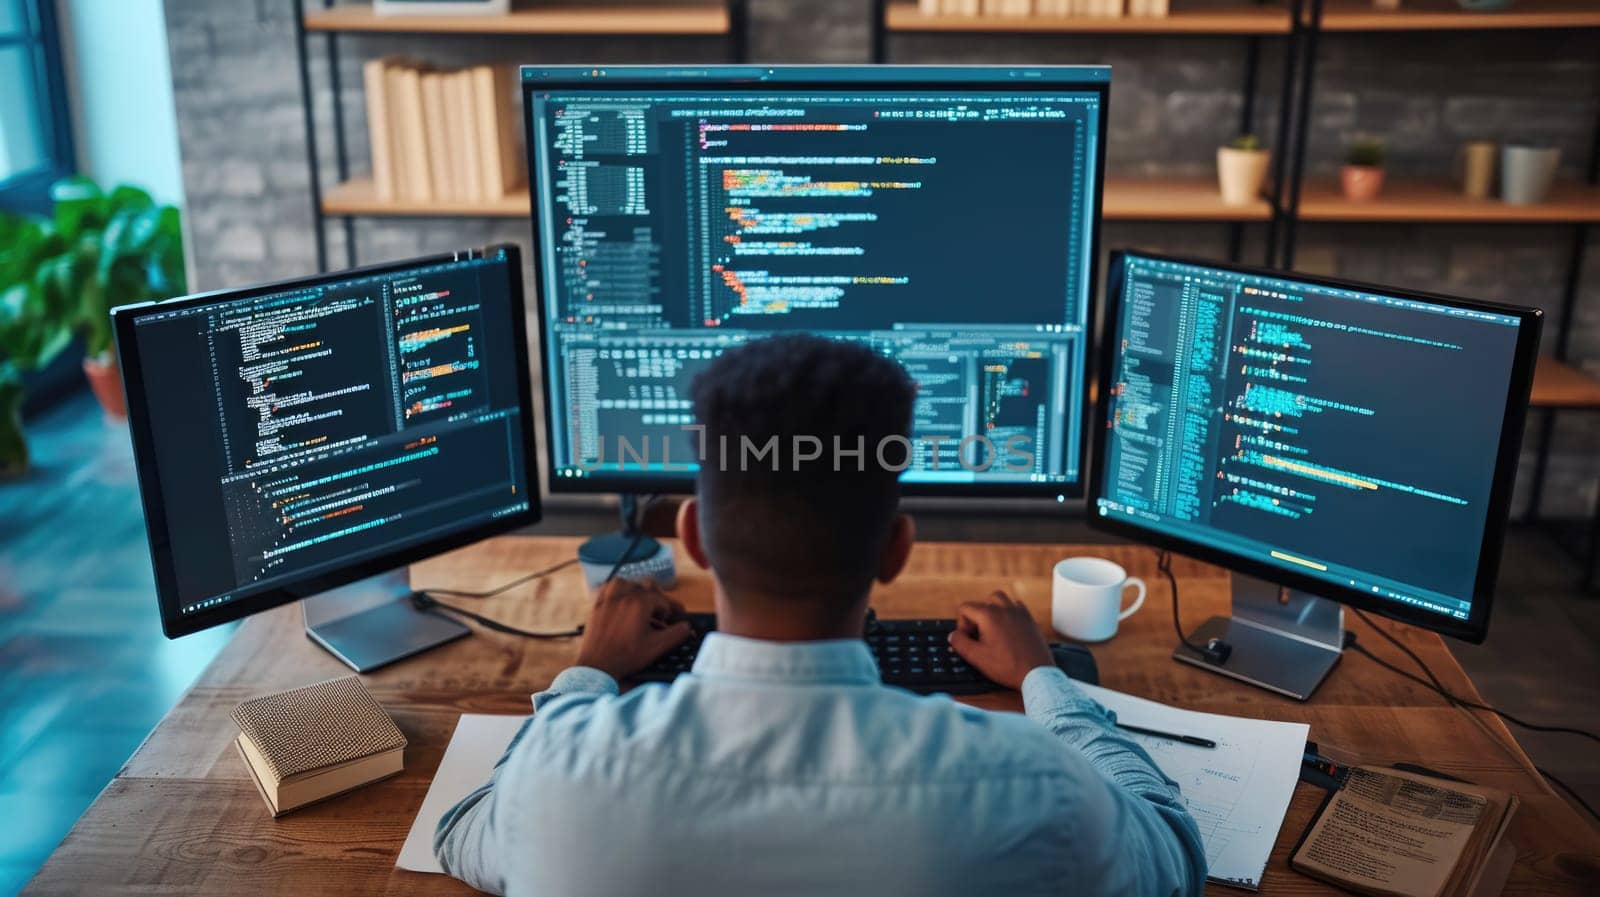 Software Developer Working on Code in Dual Monitor Setup AIG41 by biancoblue